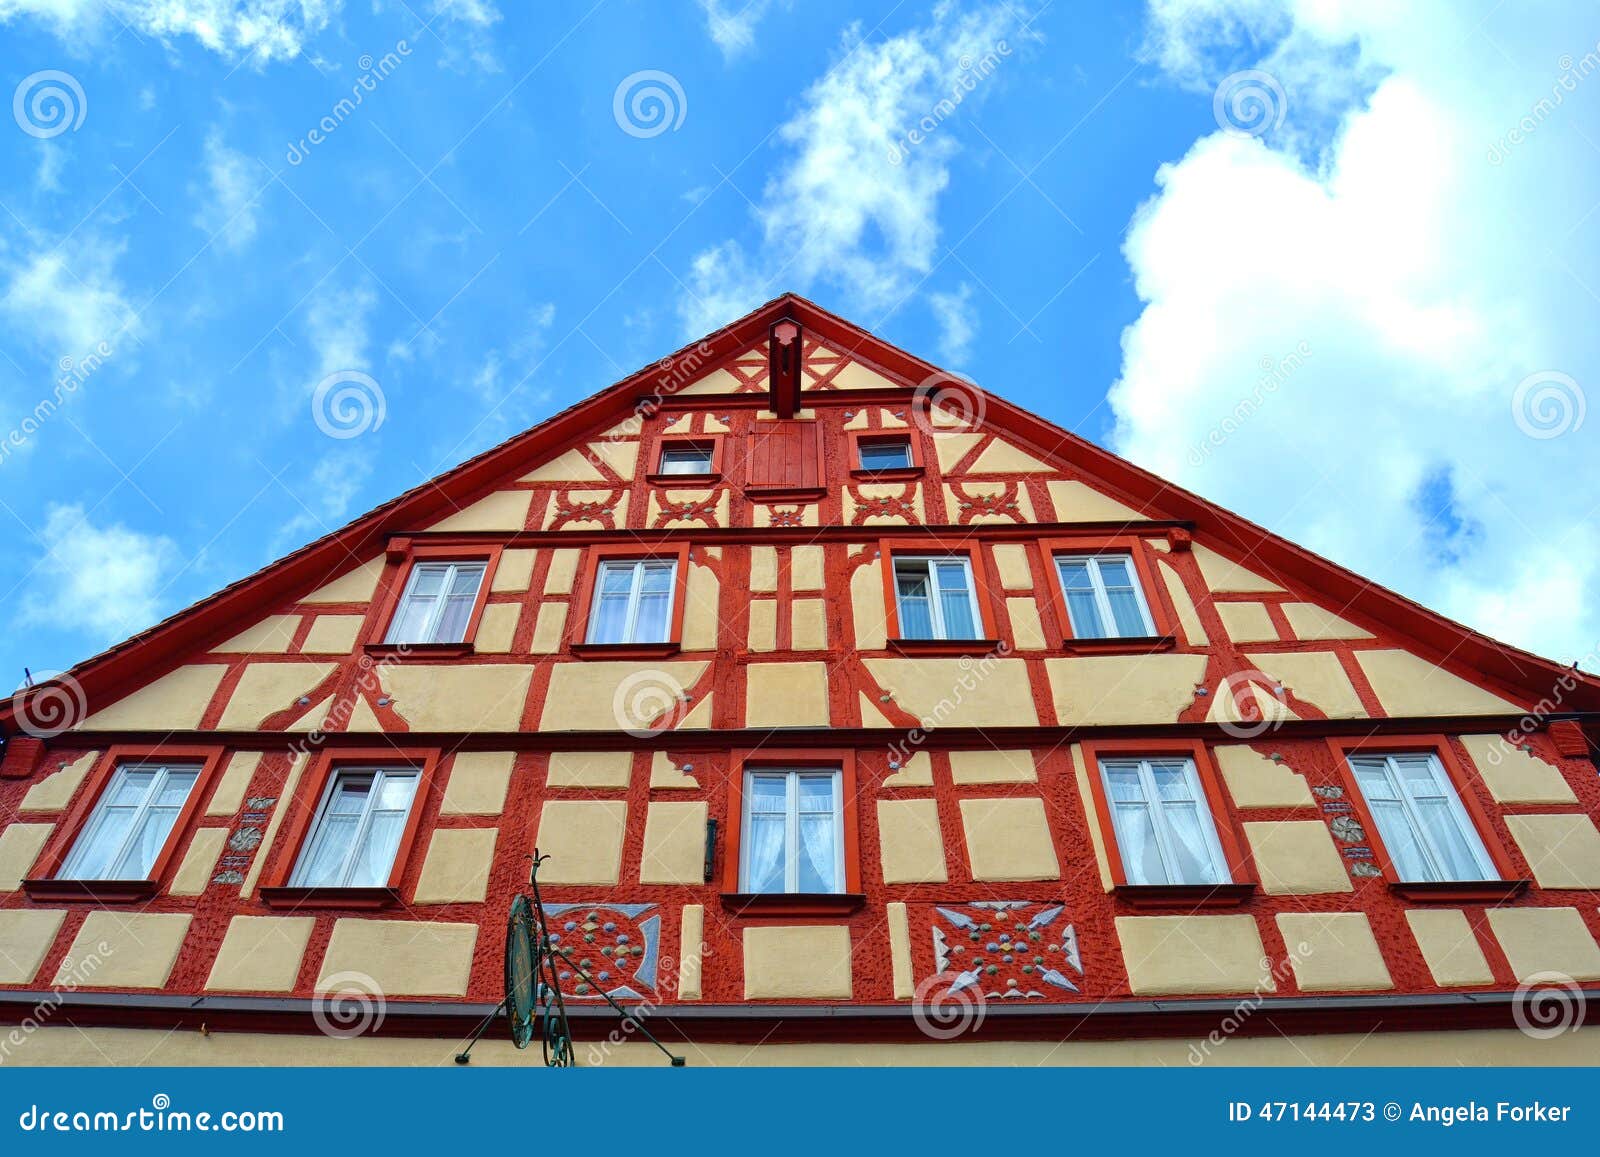 gorgeous half-timbered house in germany